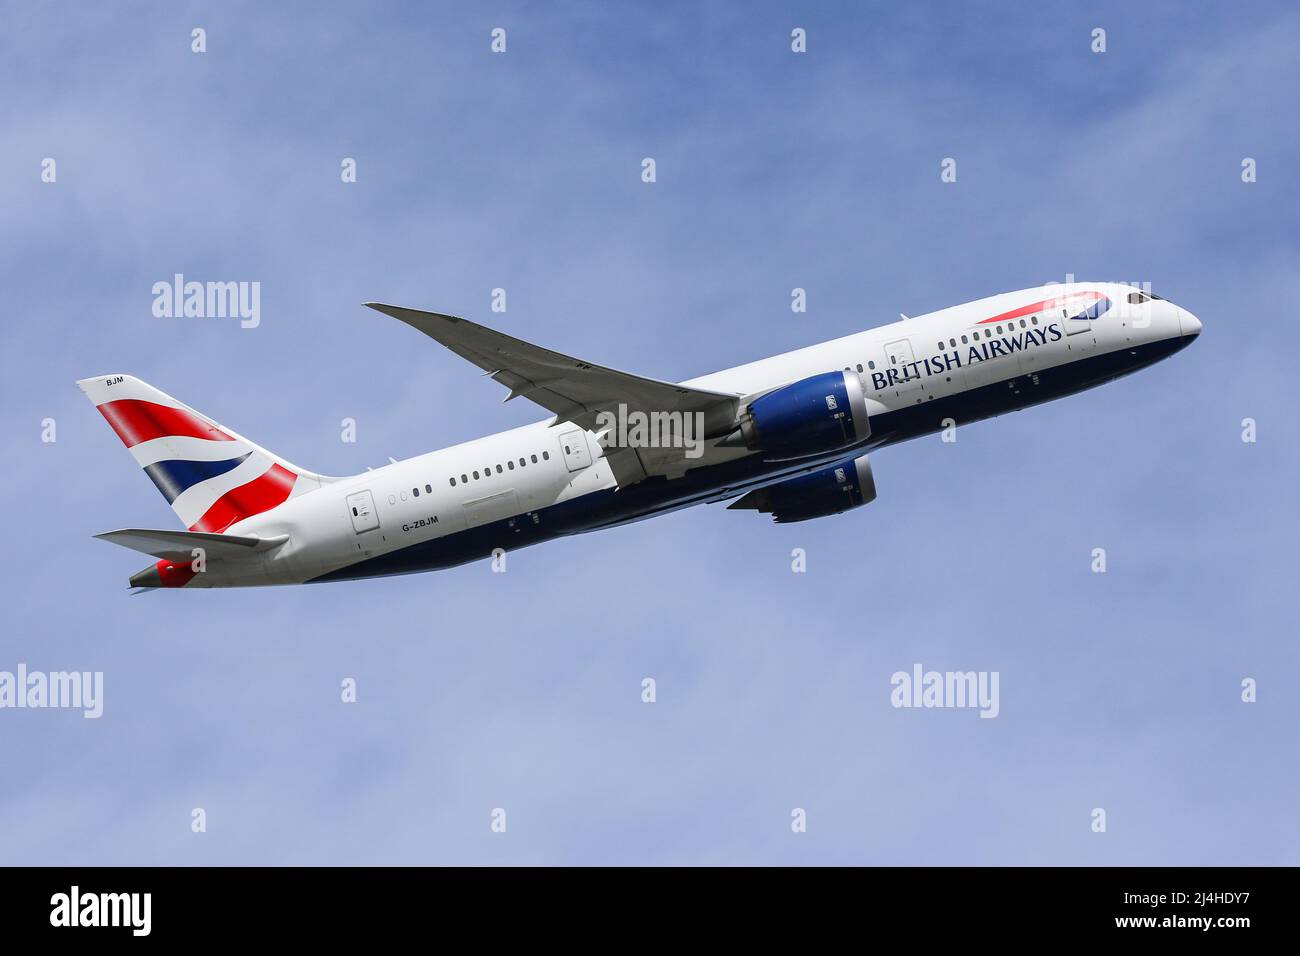 A Boeing 787 operated by British Airways departs from London Heathrow Airport Stock Photo